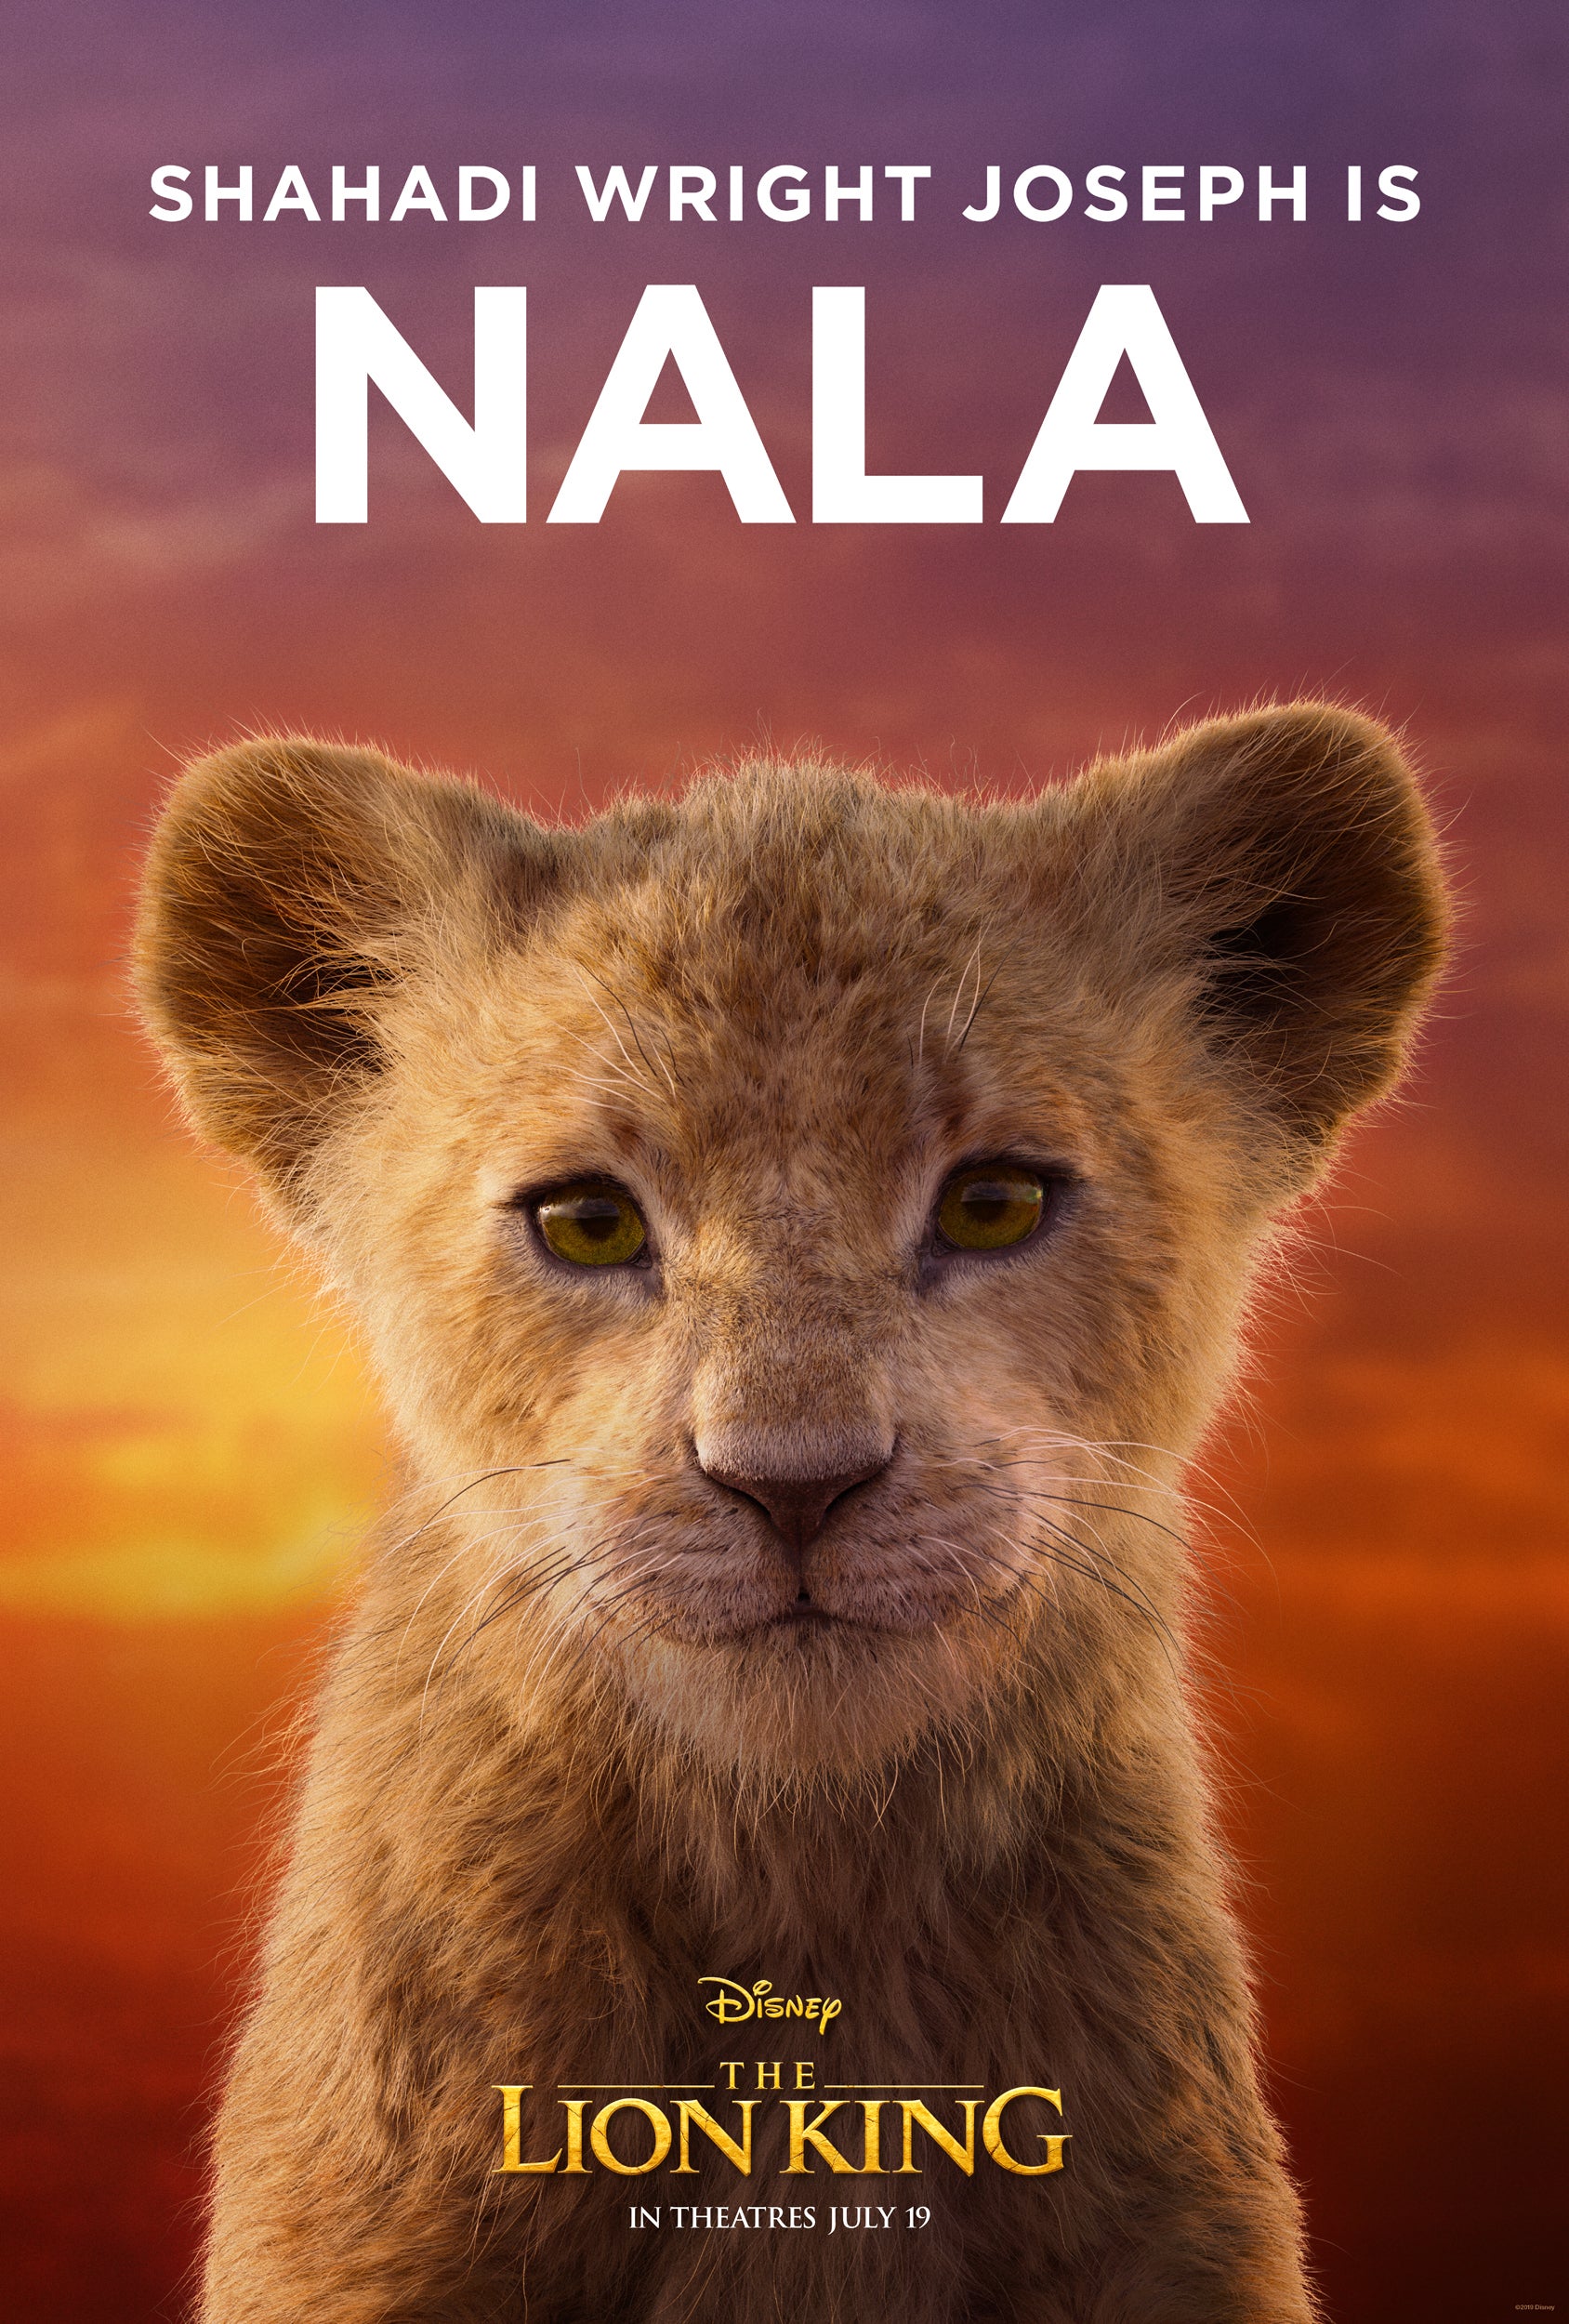 The Lion King Posters Provide A New Look At Donald Glover S Simba